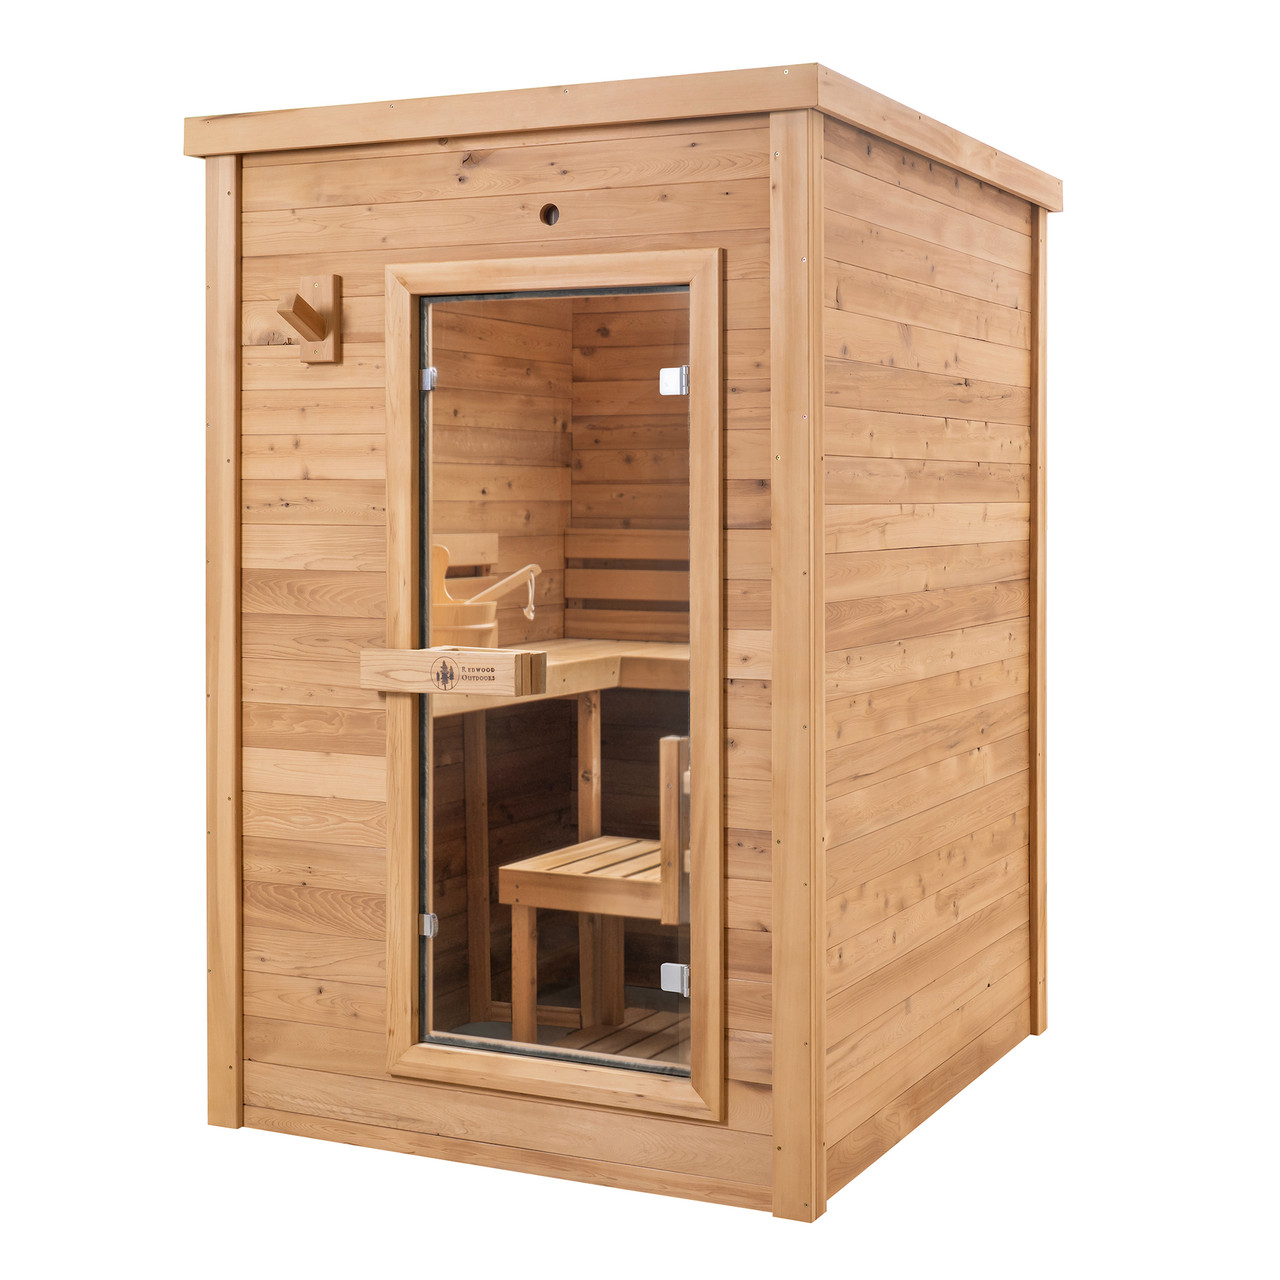 Why is a seat cover used in a sauna? - World of Sauna